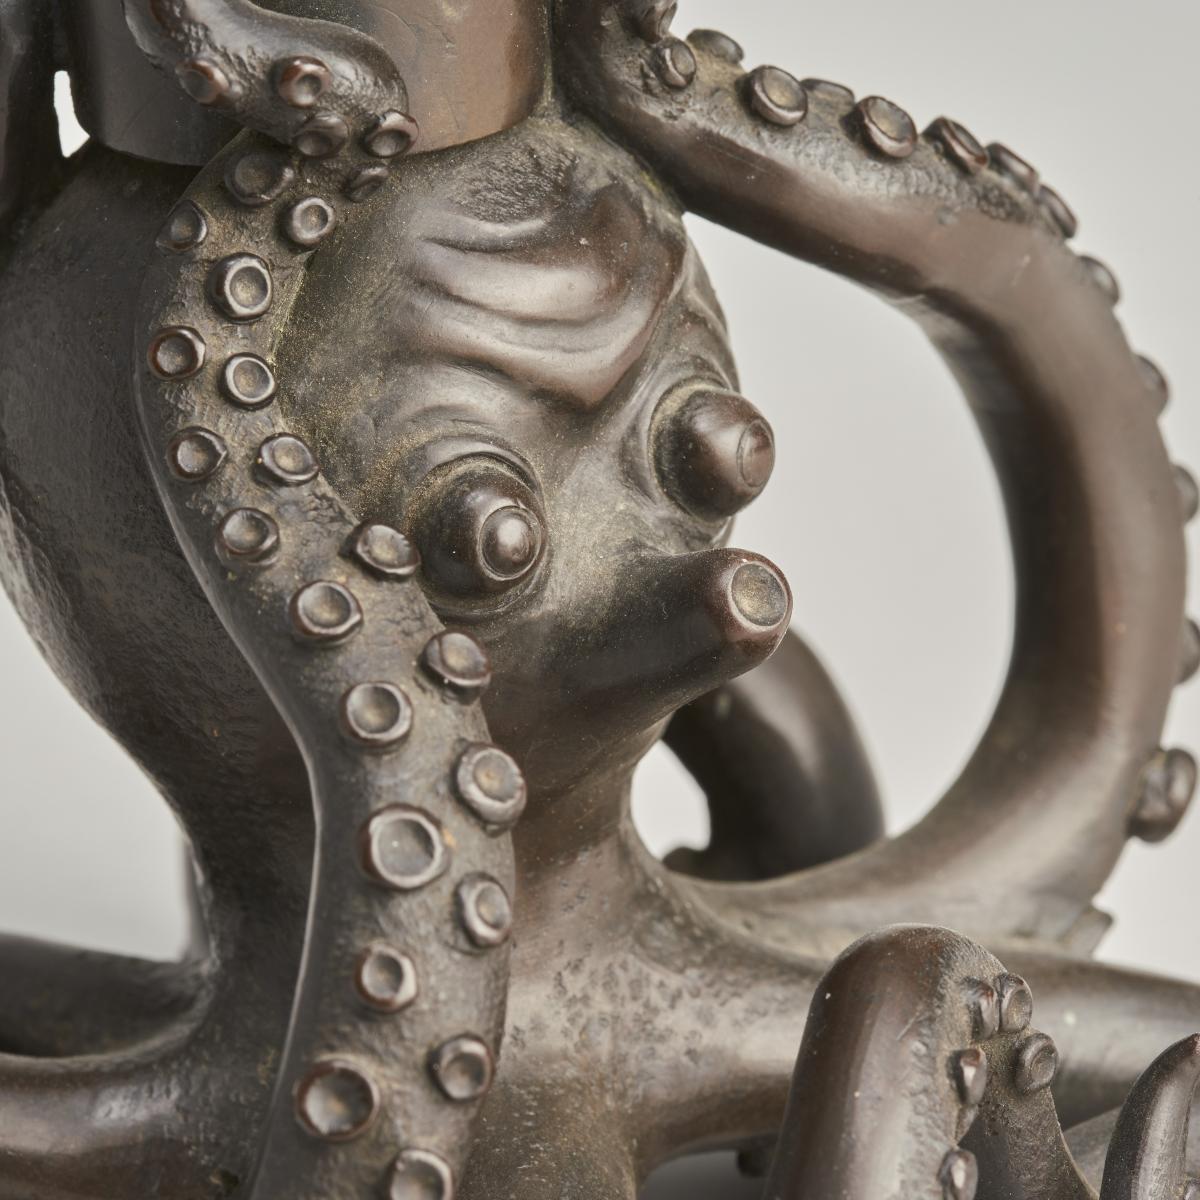 An amusing pair of Bronze and multi-metal vases supported by Octopuses